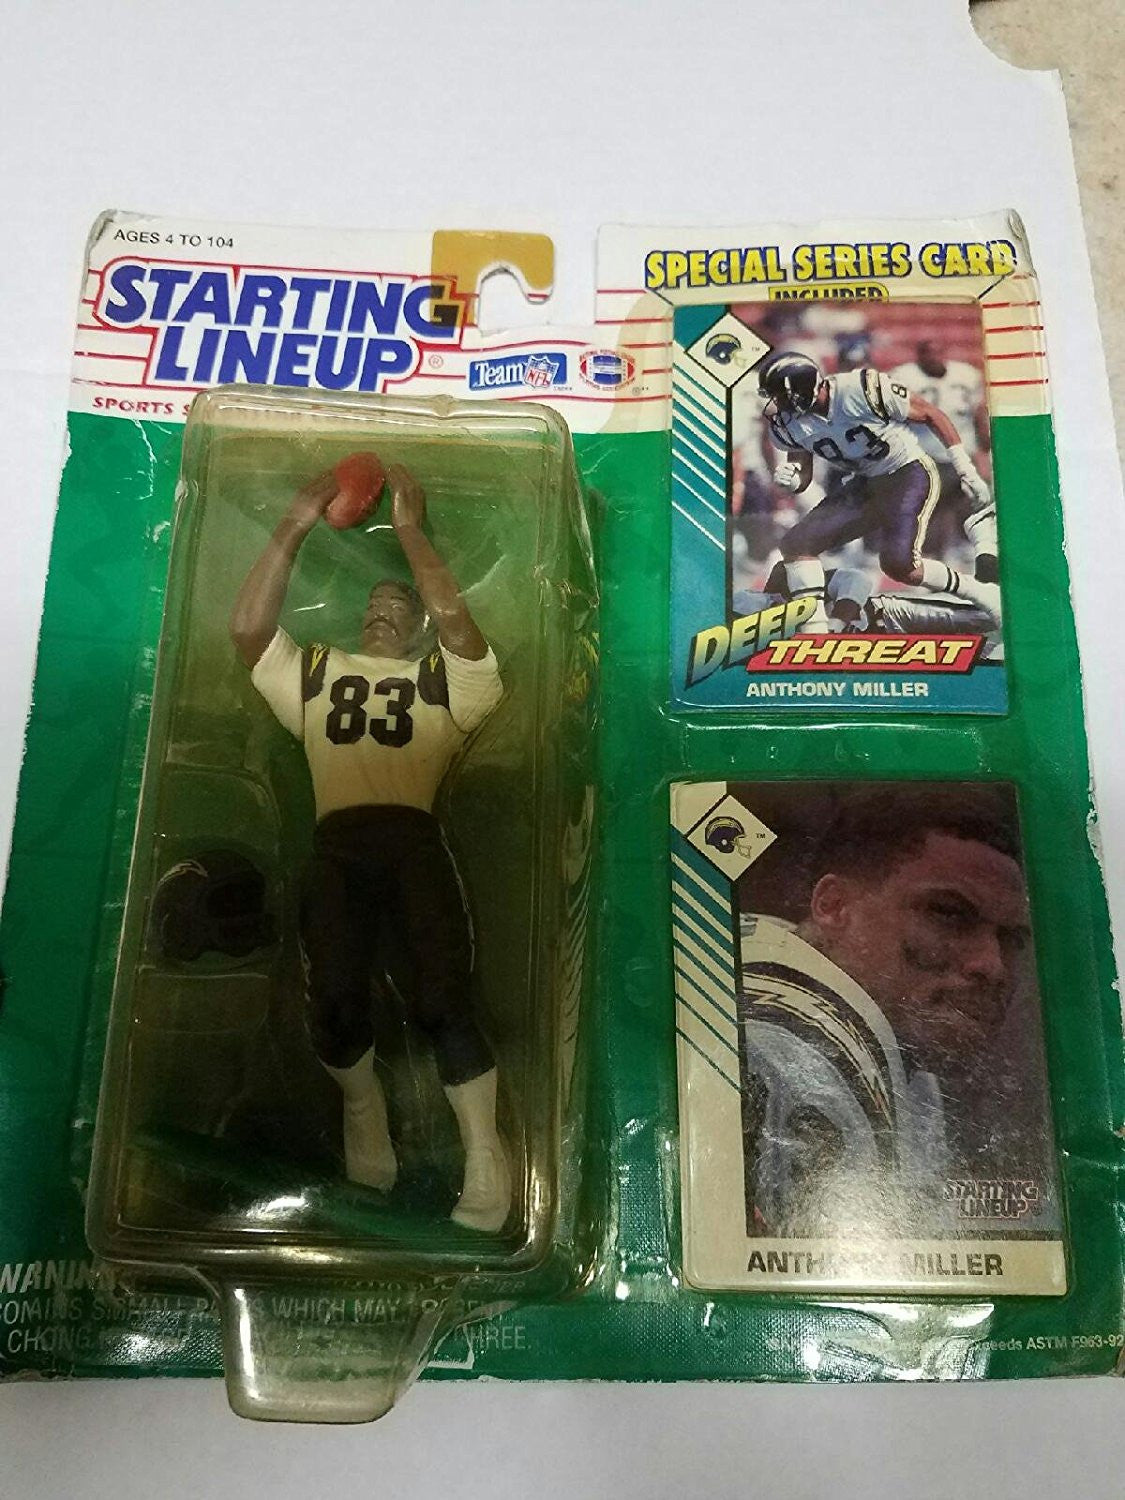 Anthony Miller 1993 Starting Lineup Figure with Trading Card